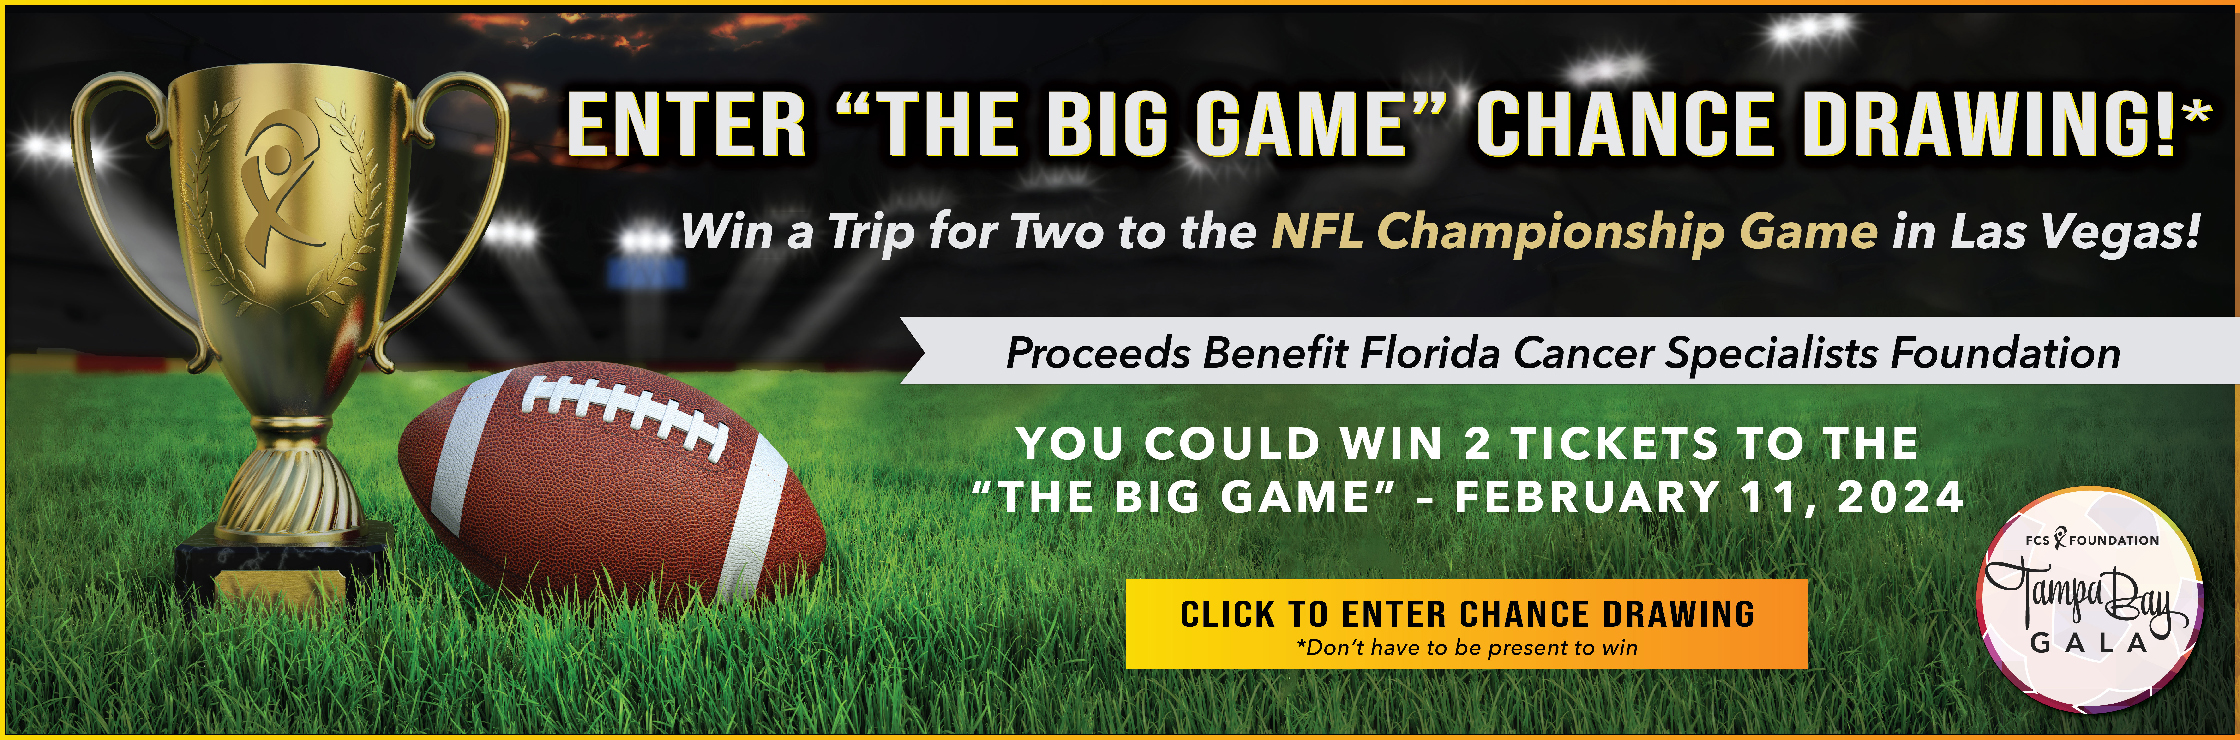 Big Game Big Give' Super Bowl Fundraiser Has a History of Problems –